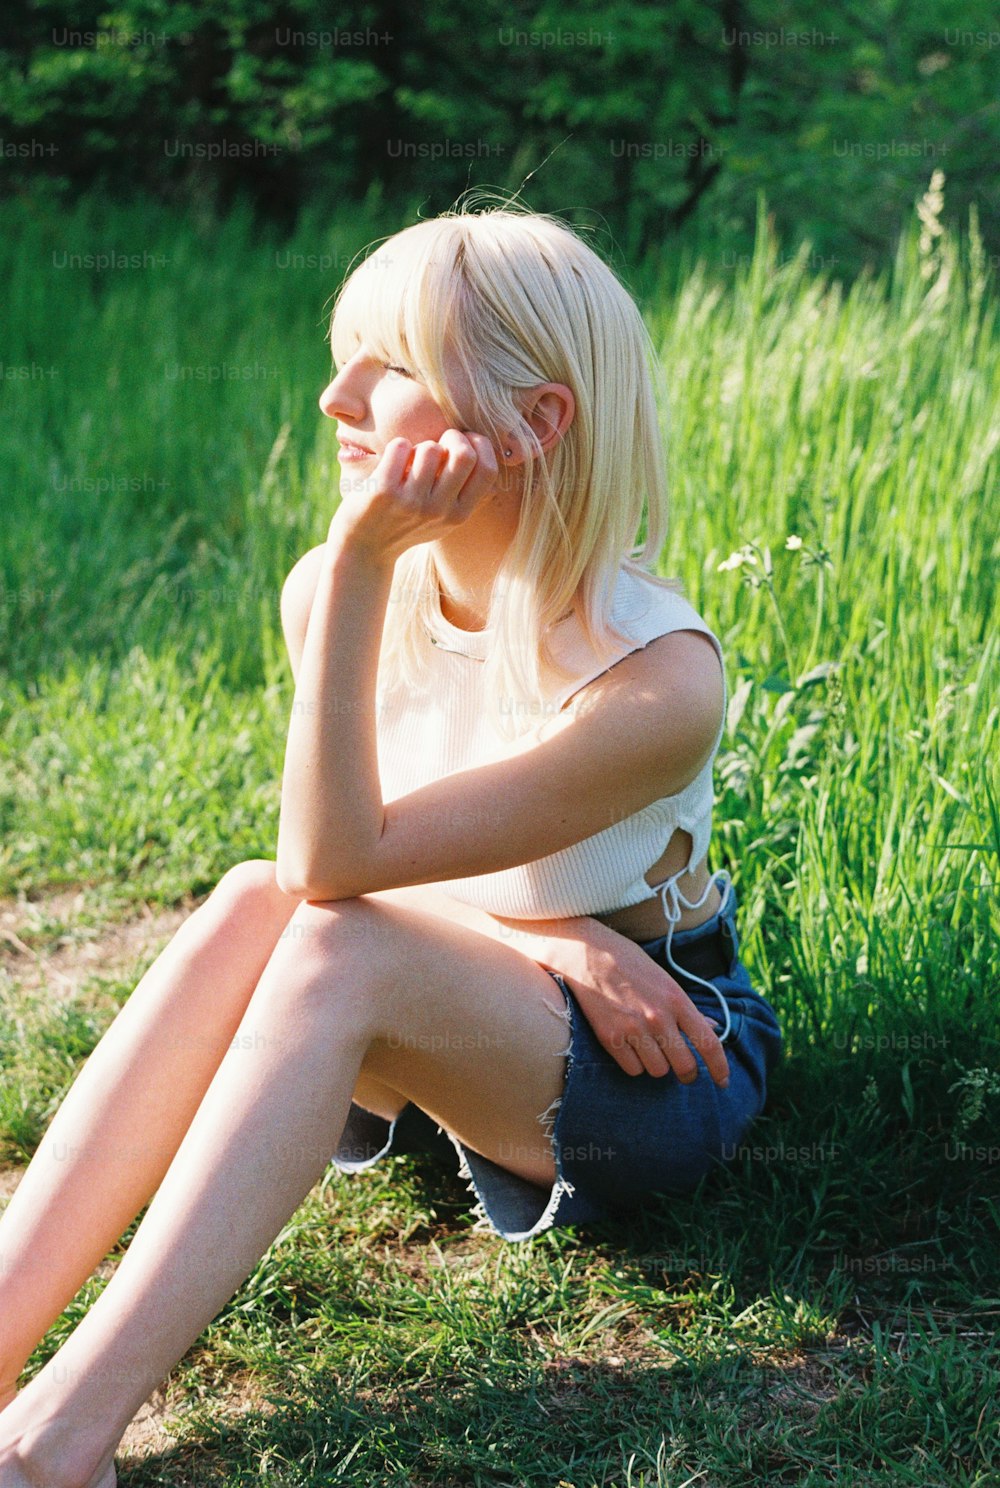 a woman sitting in the grass with her hand on her face